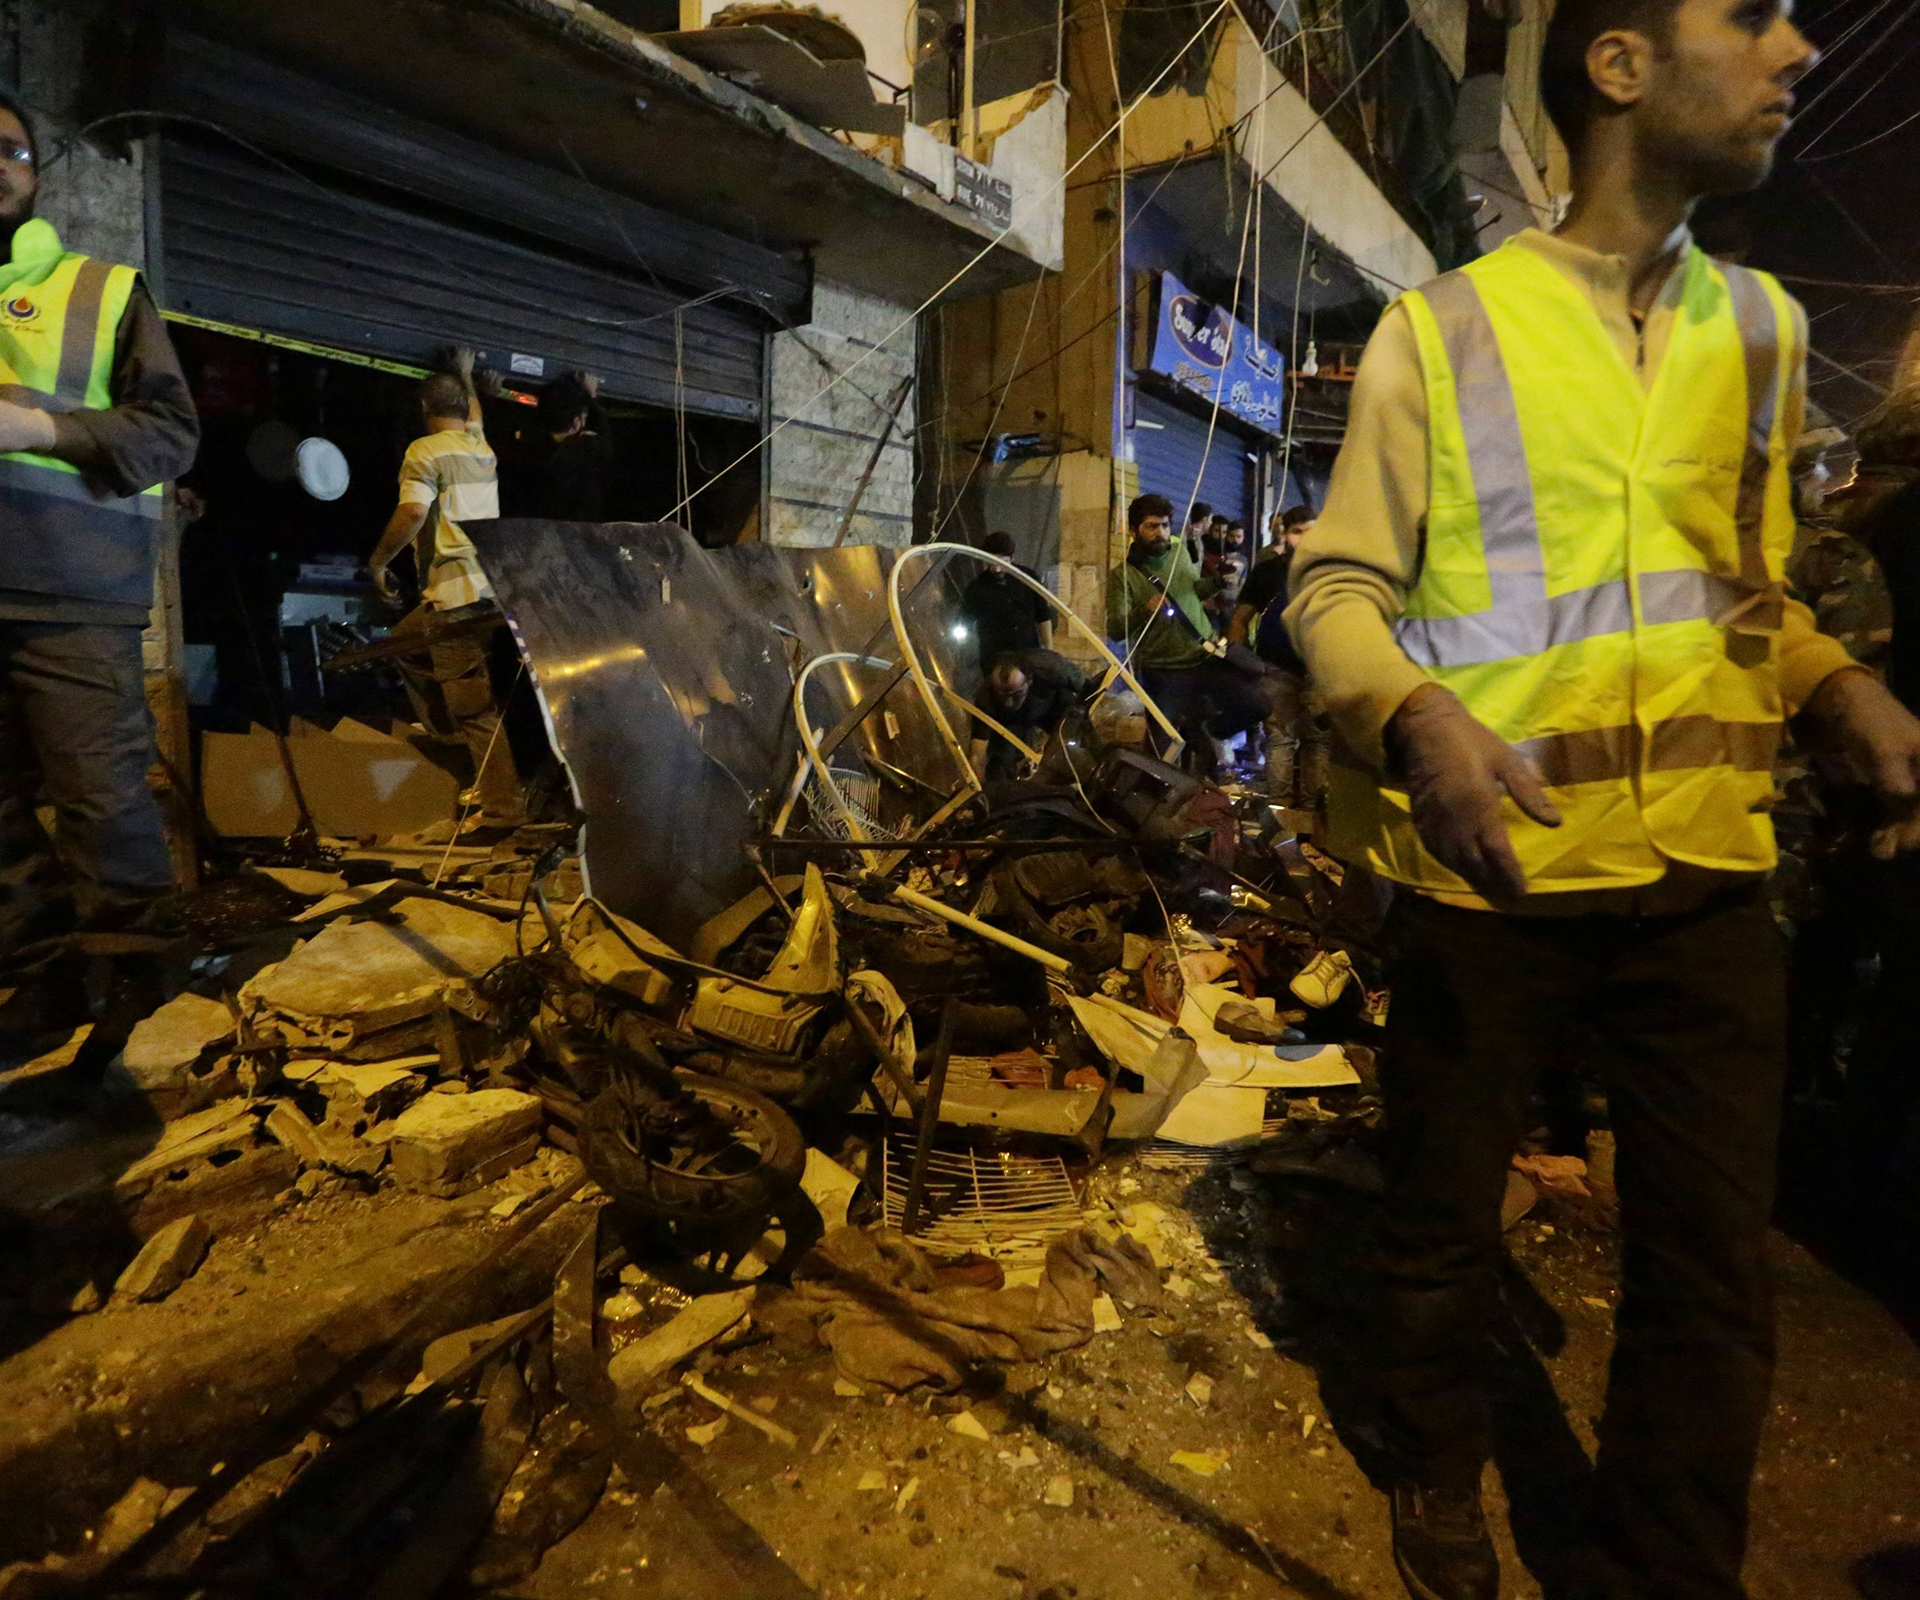 37 killed, 181 injured in twin suicide bombings in Lebanon